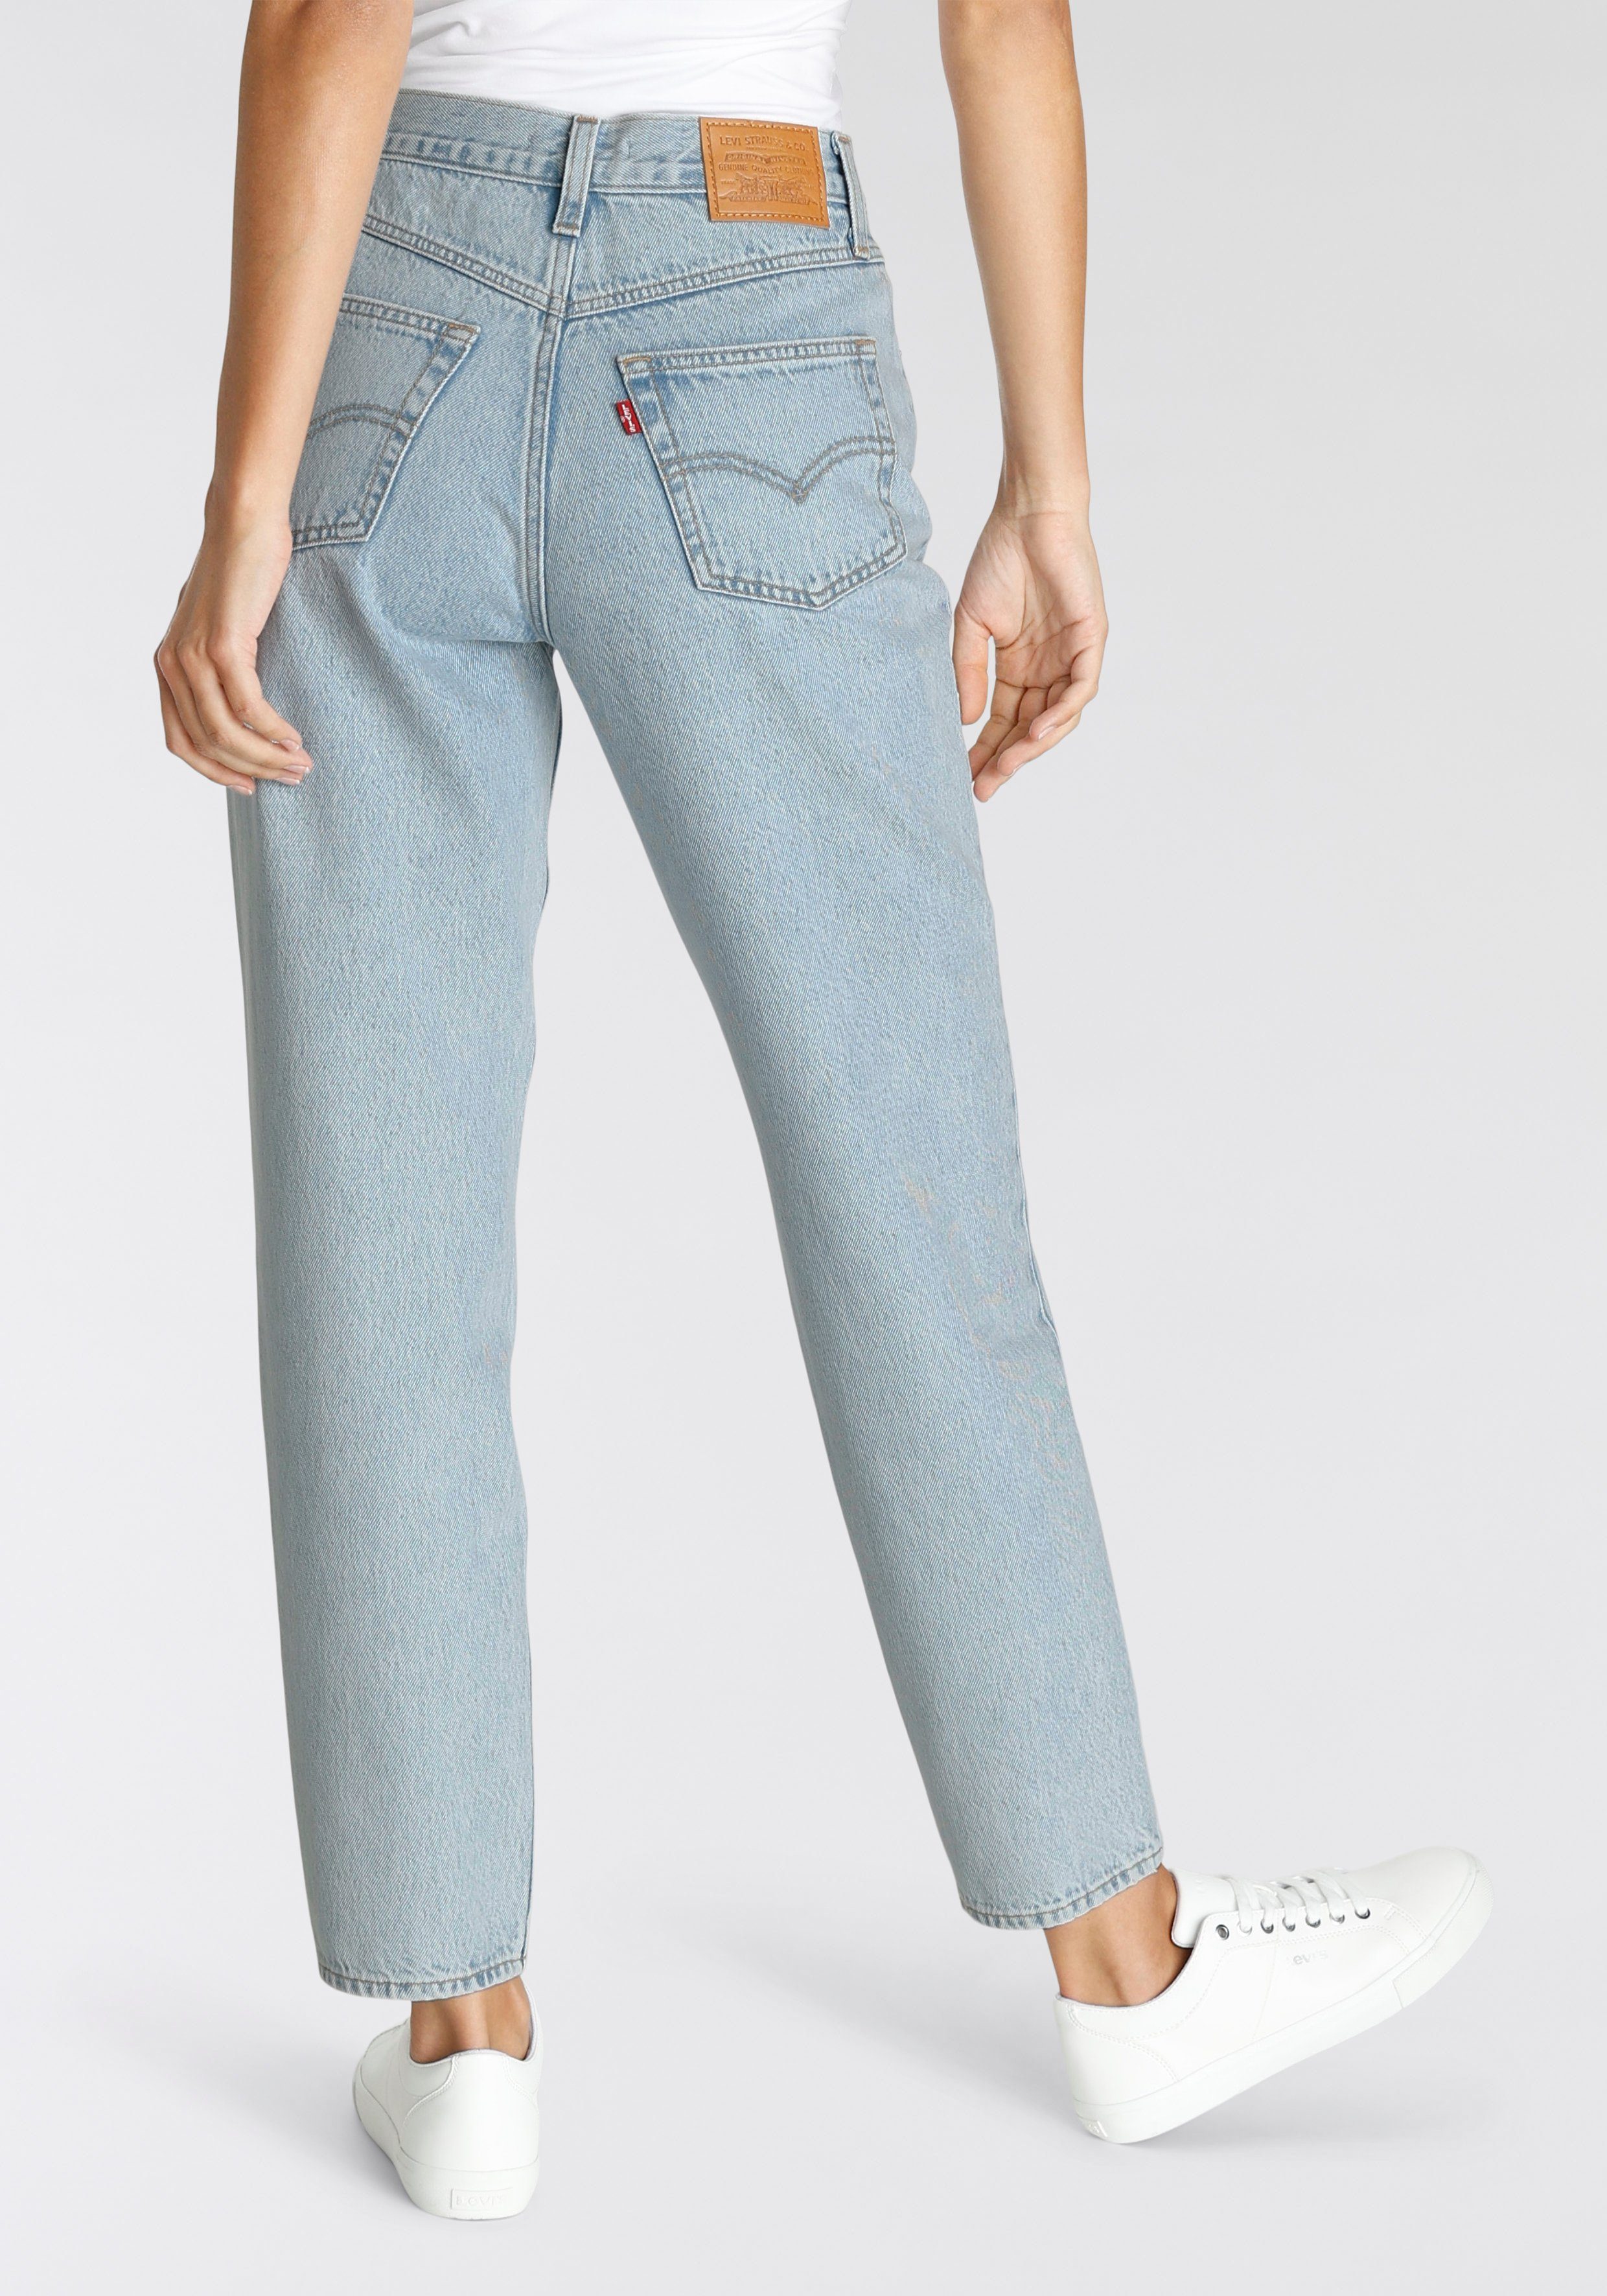 frayed JEANS be Levi's® don't 80S MOM Mom-Jeans